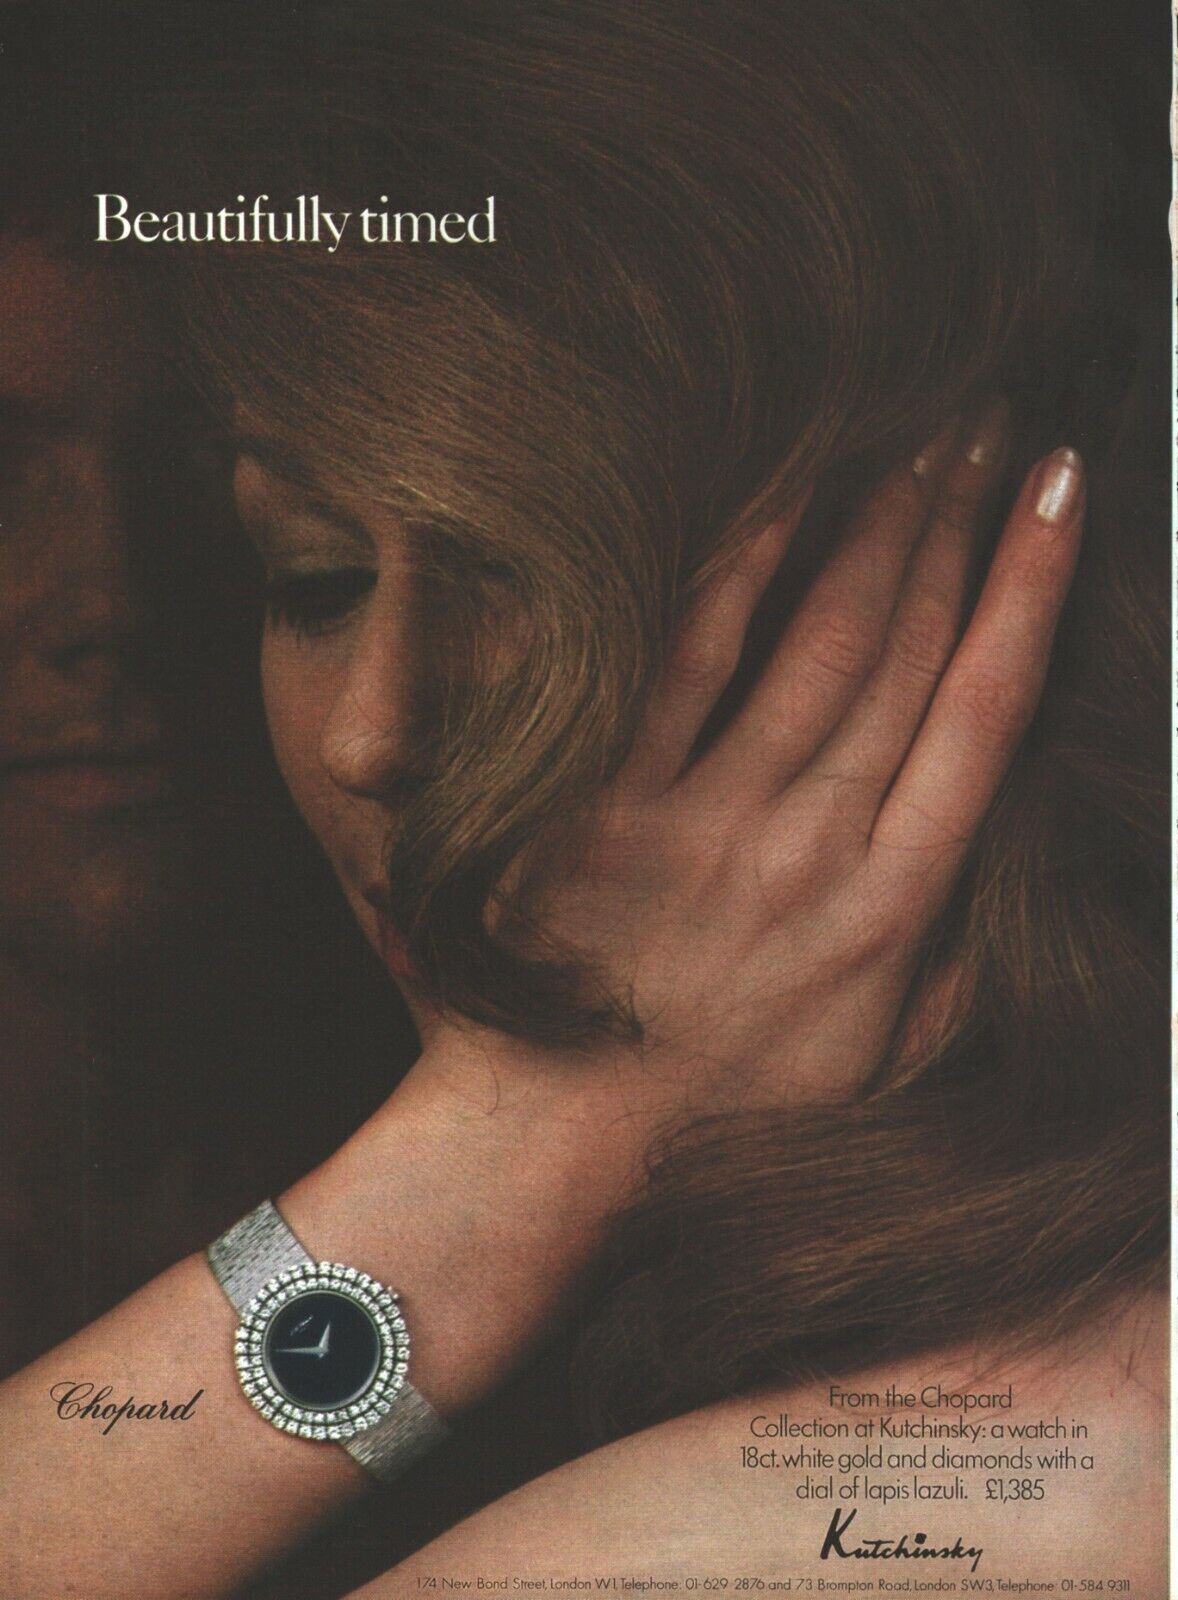 1971 Kutchinskyi Chopard Collection Watch 18ct White Gold - Vintage Ad